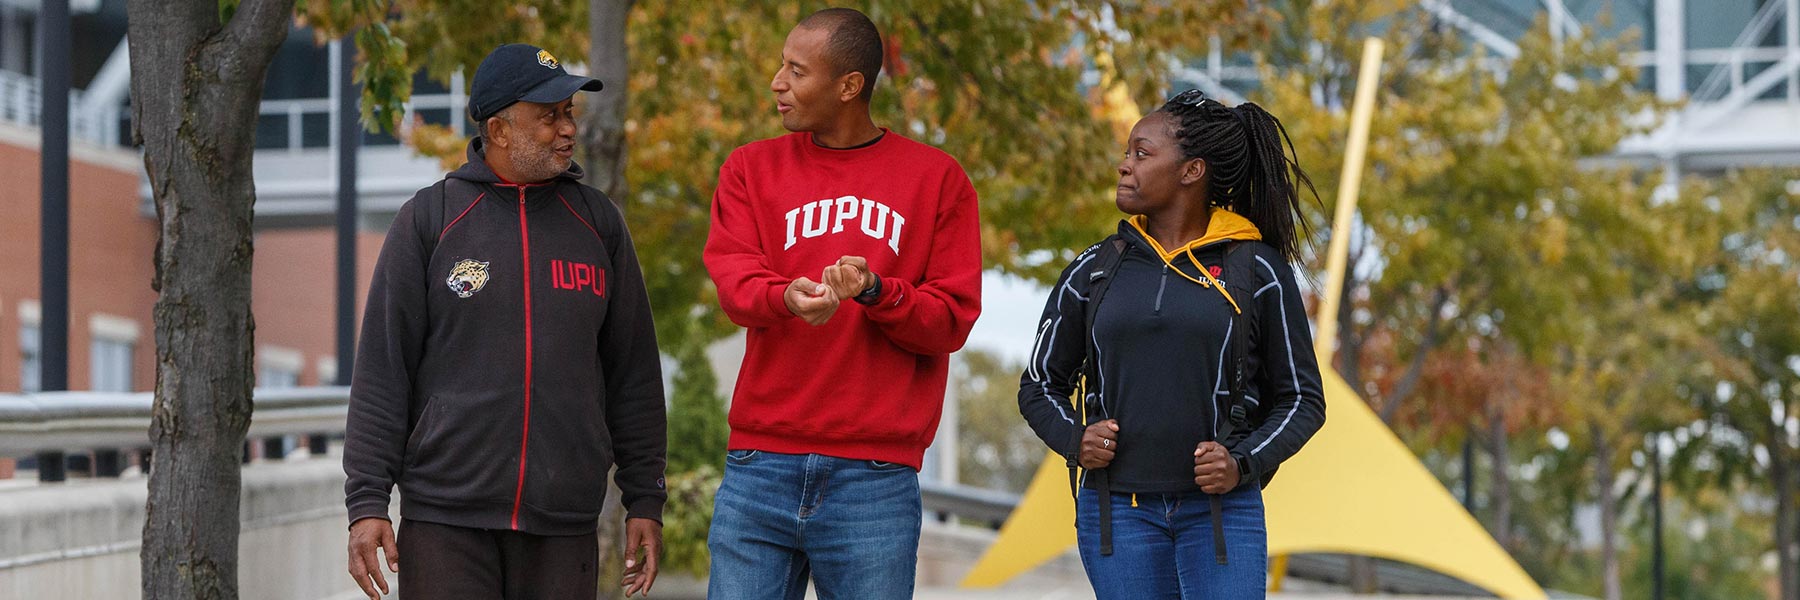 Three people have a conversation as they walk on campus.